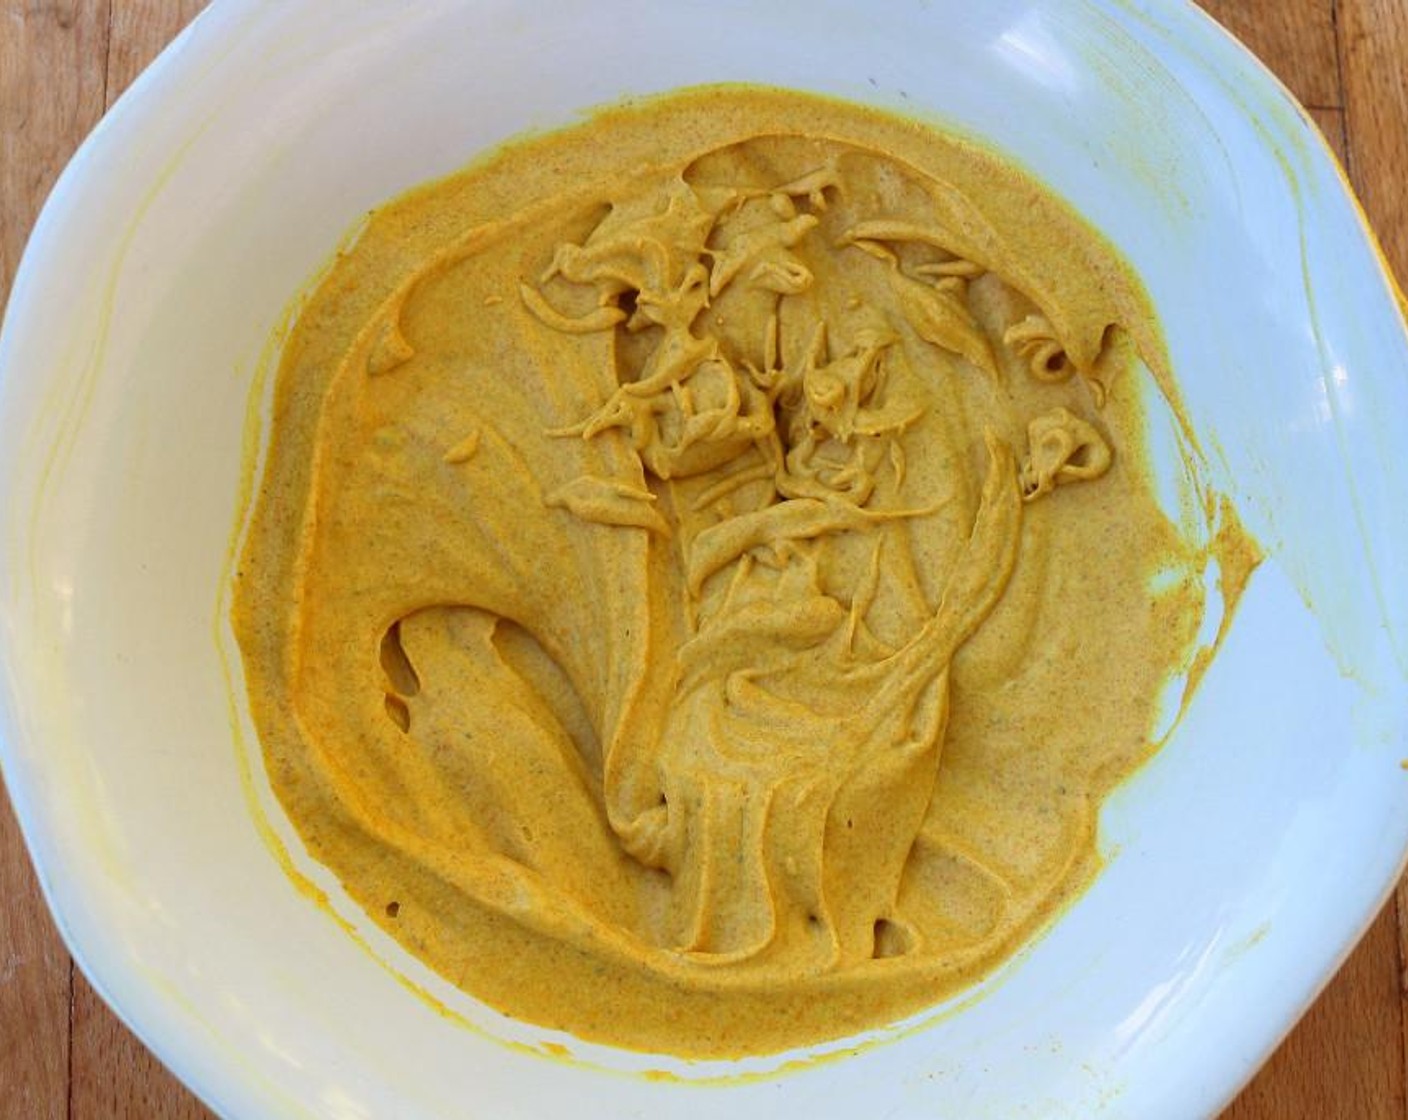 step 5 For the curry sauce, blend together Heavy Cream (1 cup), Curry Powder (1 tsp), Garam Masala (1 tsp), Kosher Salt (1/2 tsp) and Ground Turmeric (1 tsp). Whisk until slightly thickened.